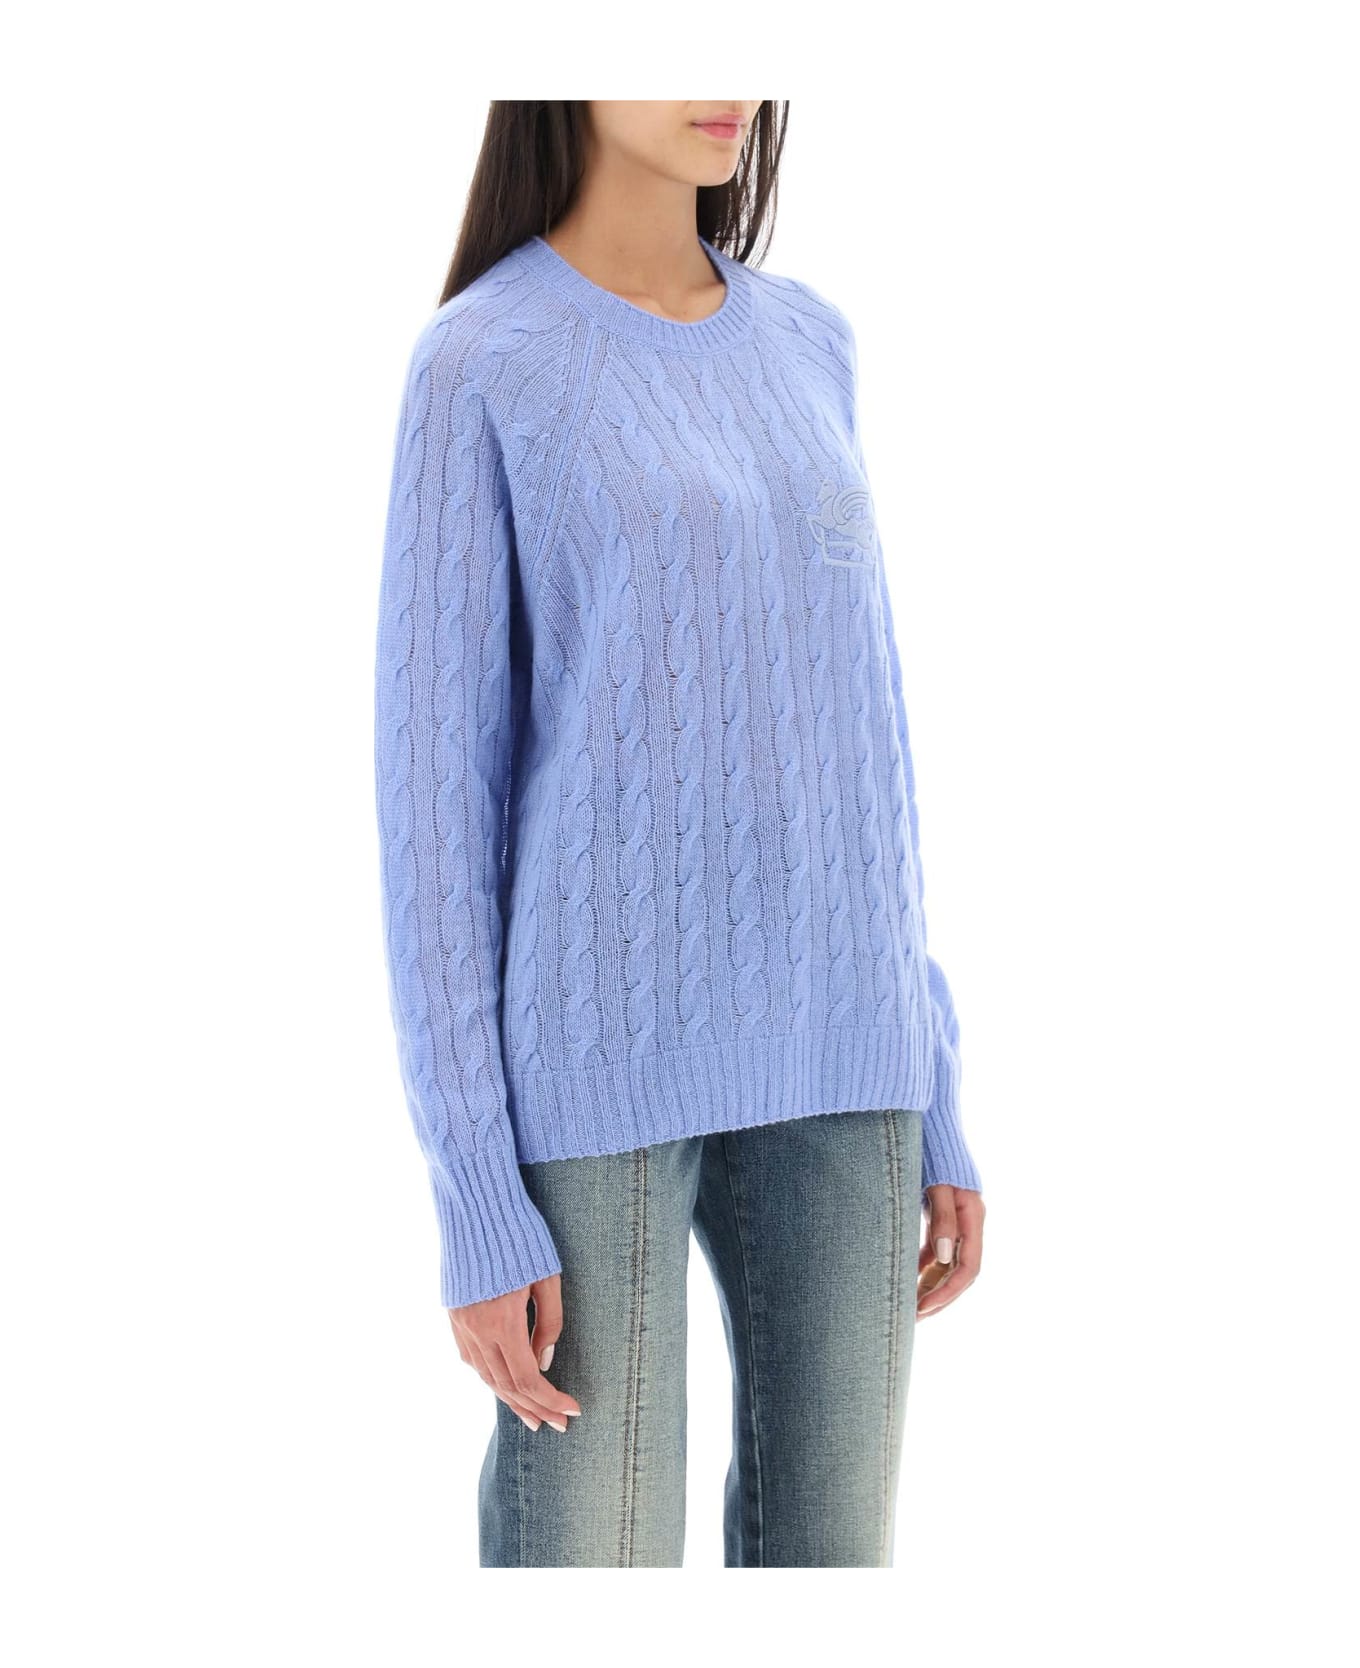 Etro Cashmere Sweater With Pegasus Embroidery - LIGHT BLUE (Light blue)